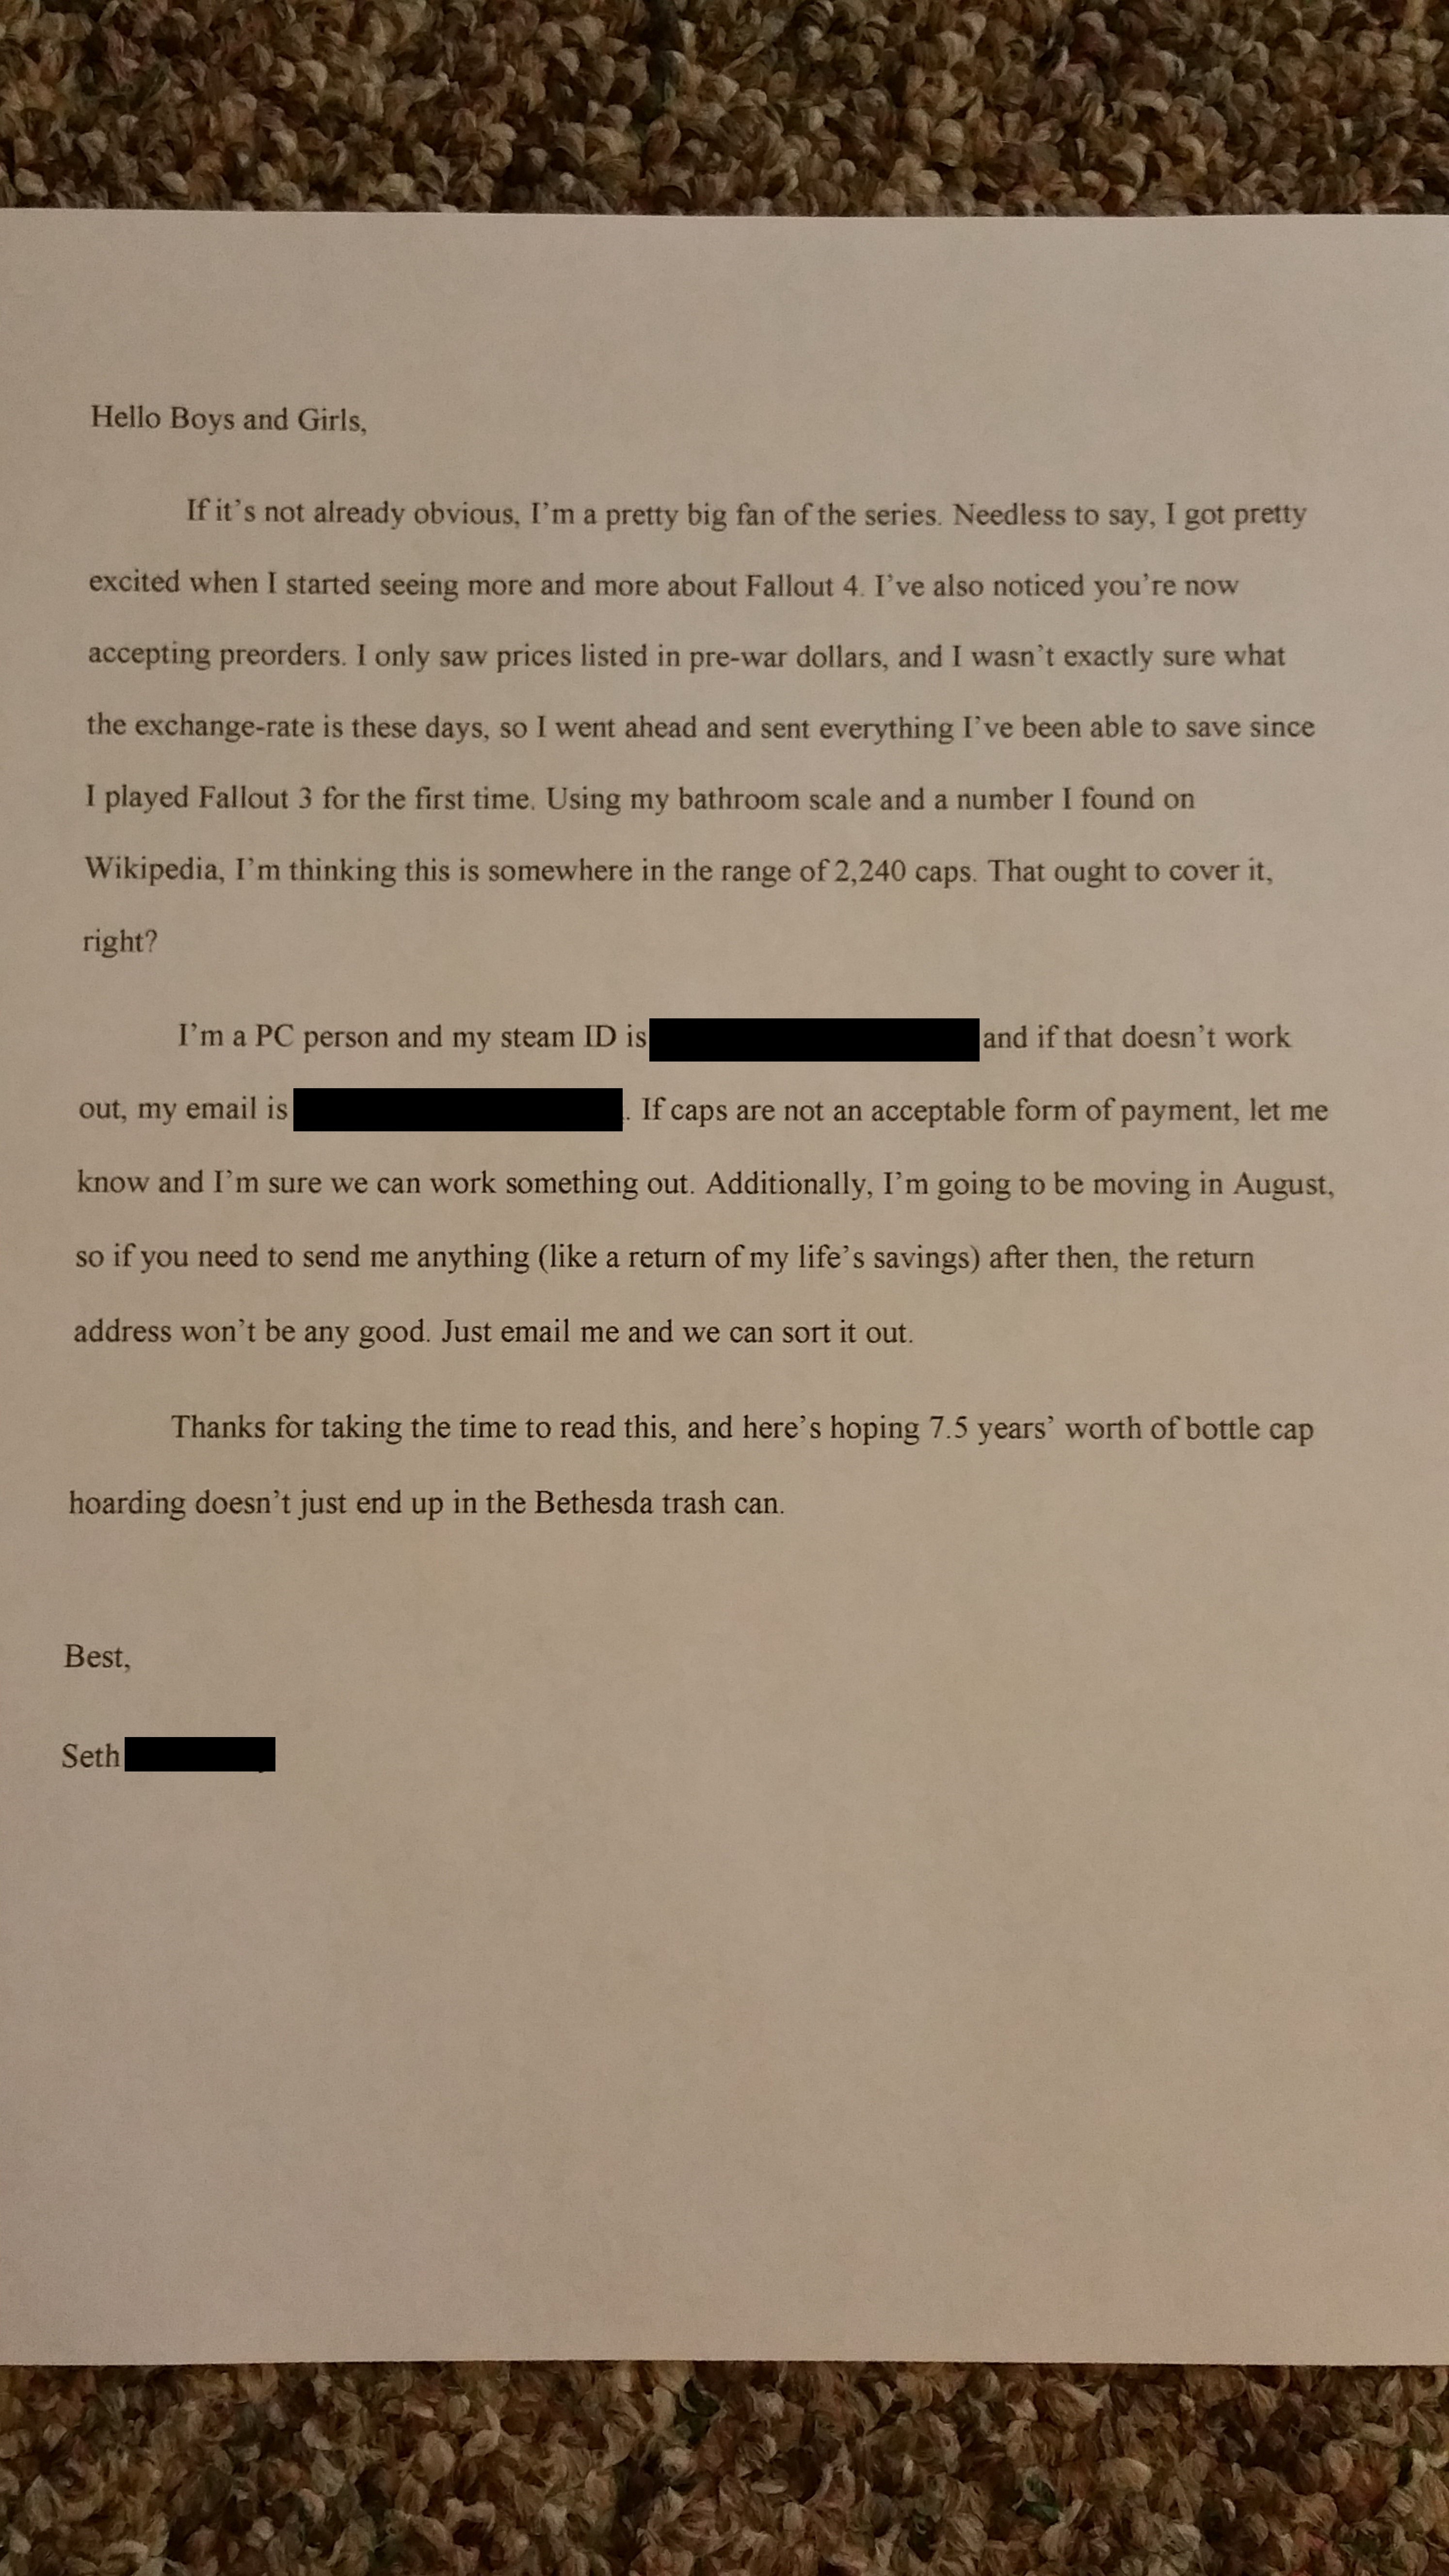 For those who missed it - the original letter the fan sent.